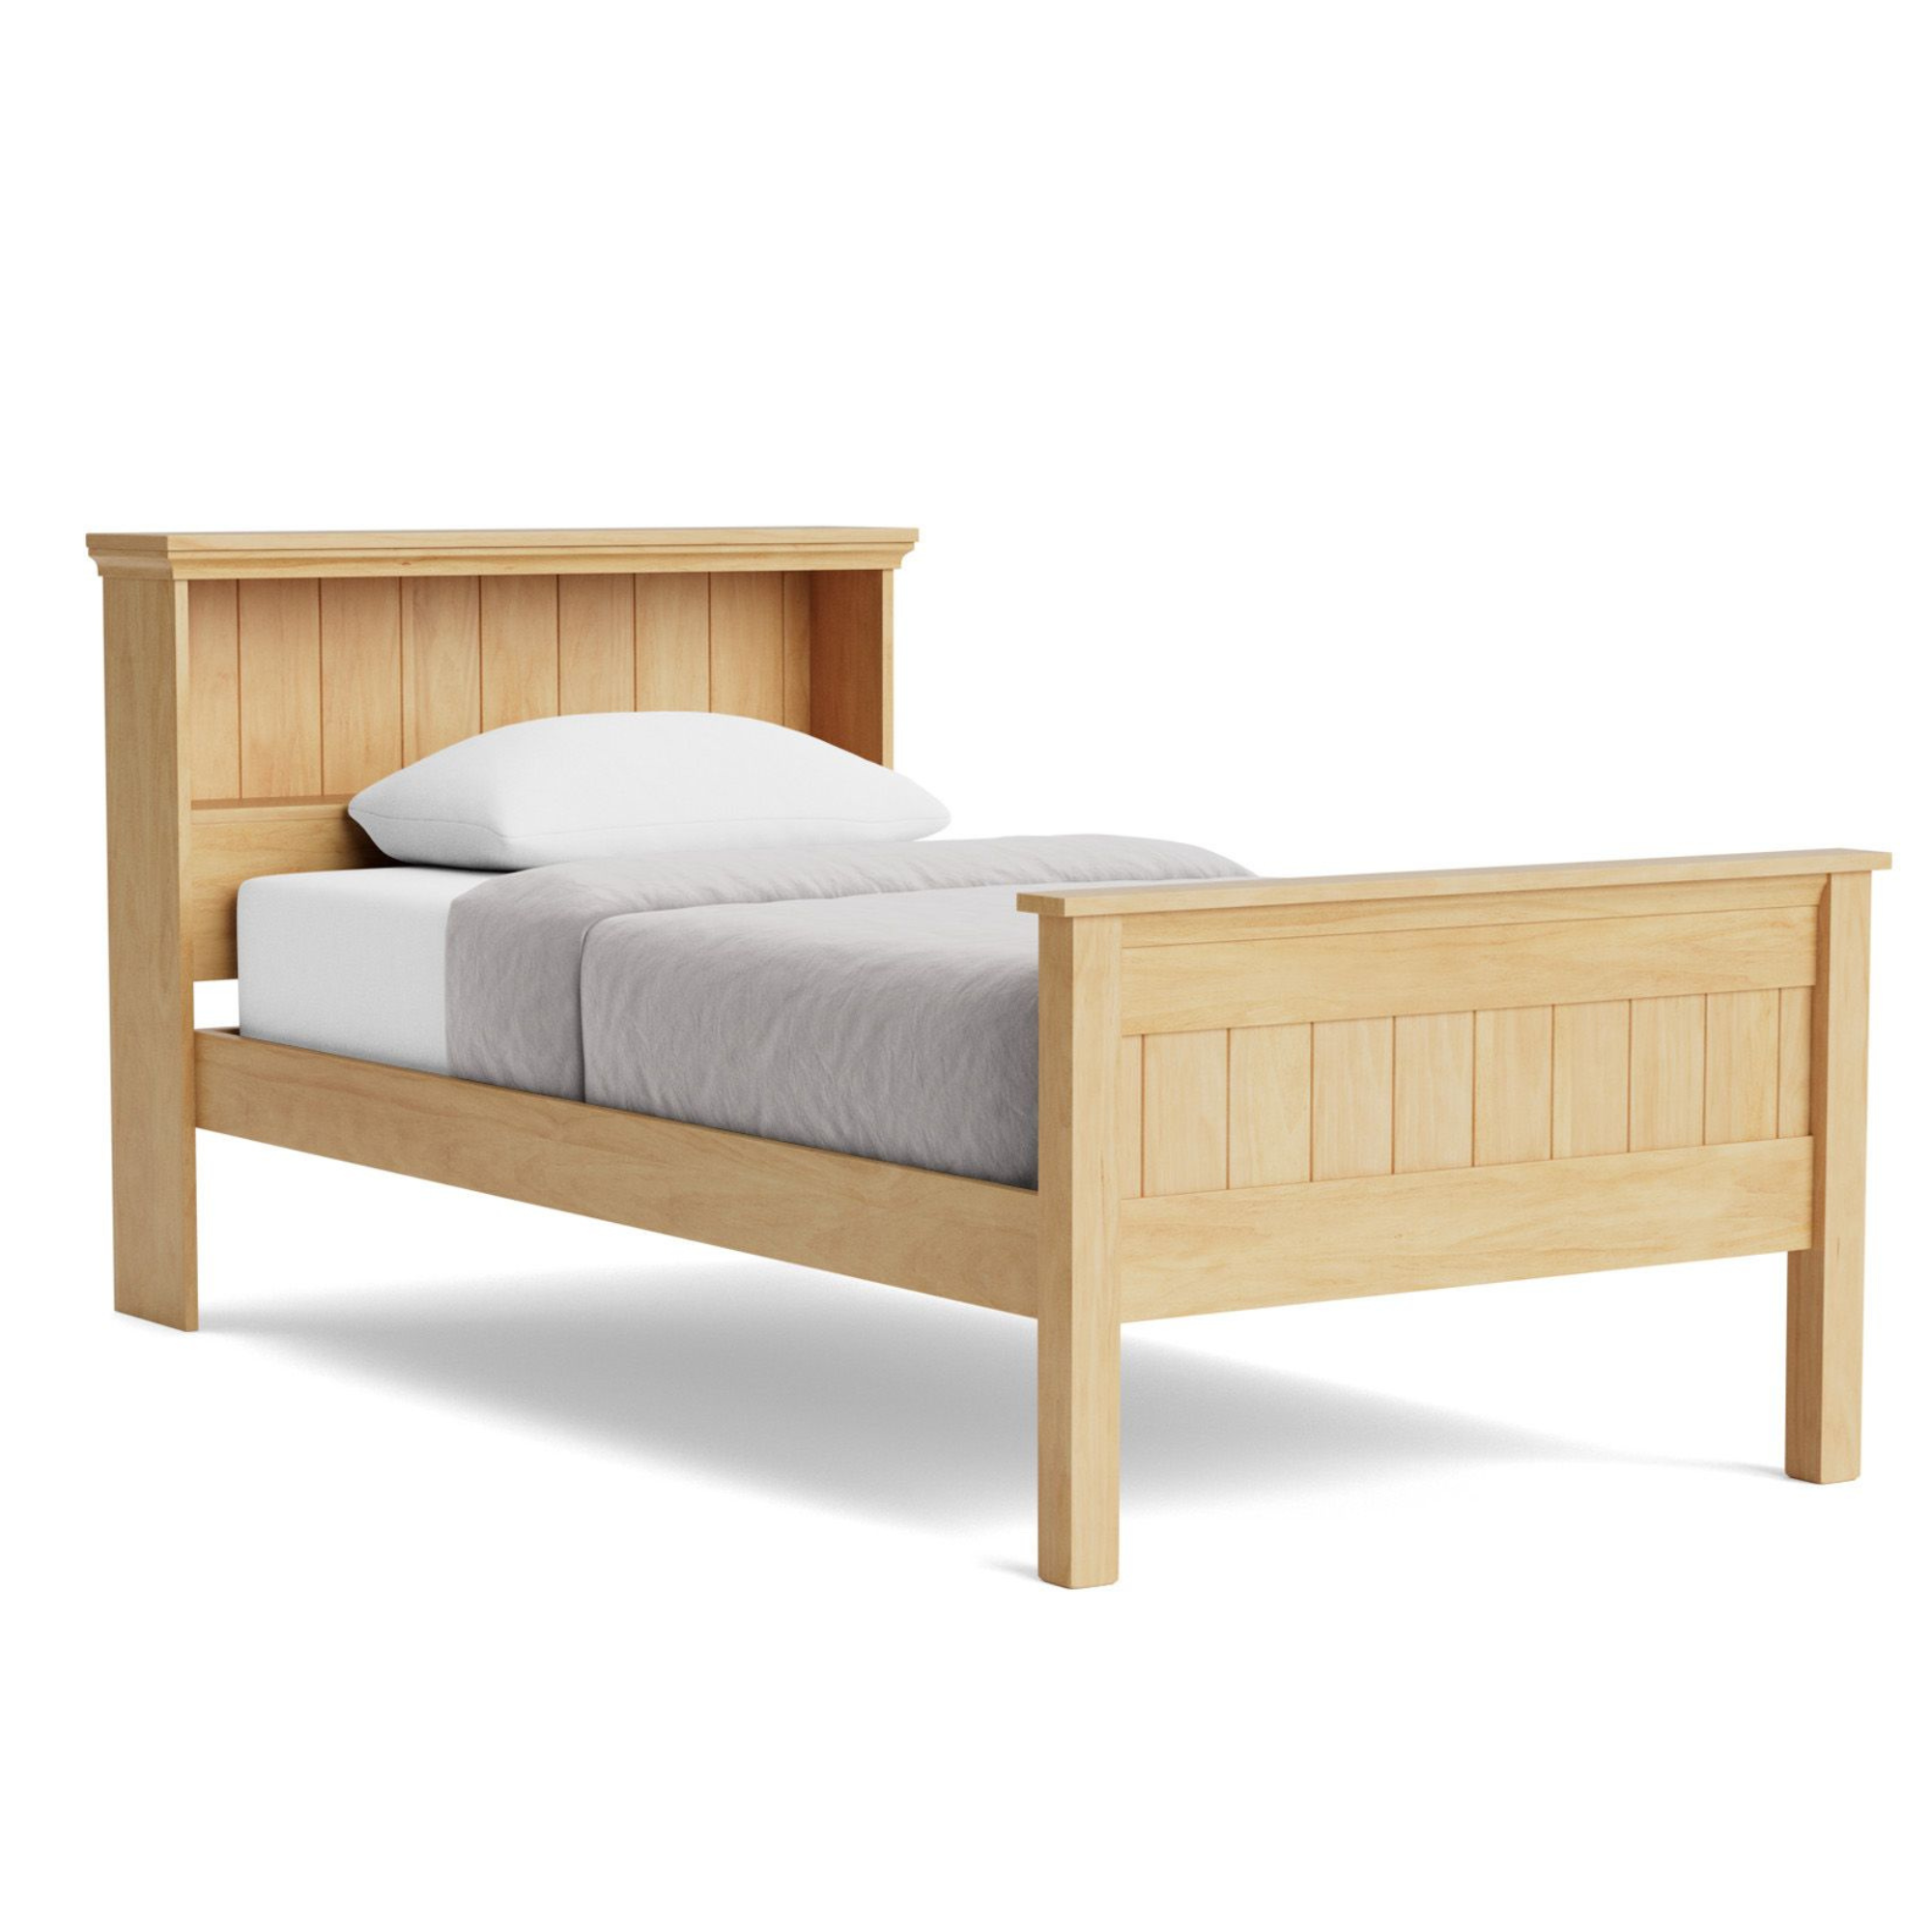 ADVENTURE SLAT BED WITH HEAD-END SHELF | LOW-FOOT OR HIGH-FOOT | NZ MADE